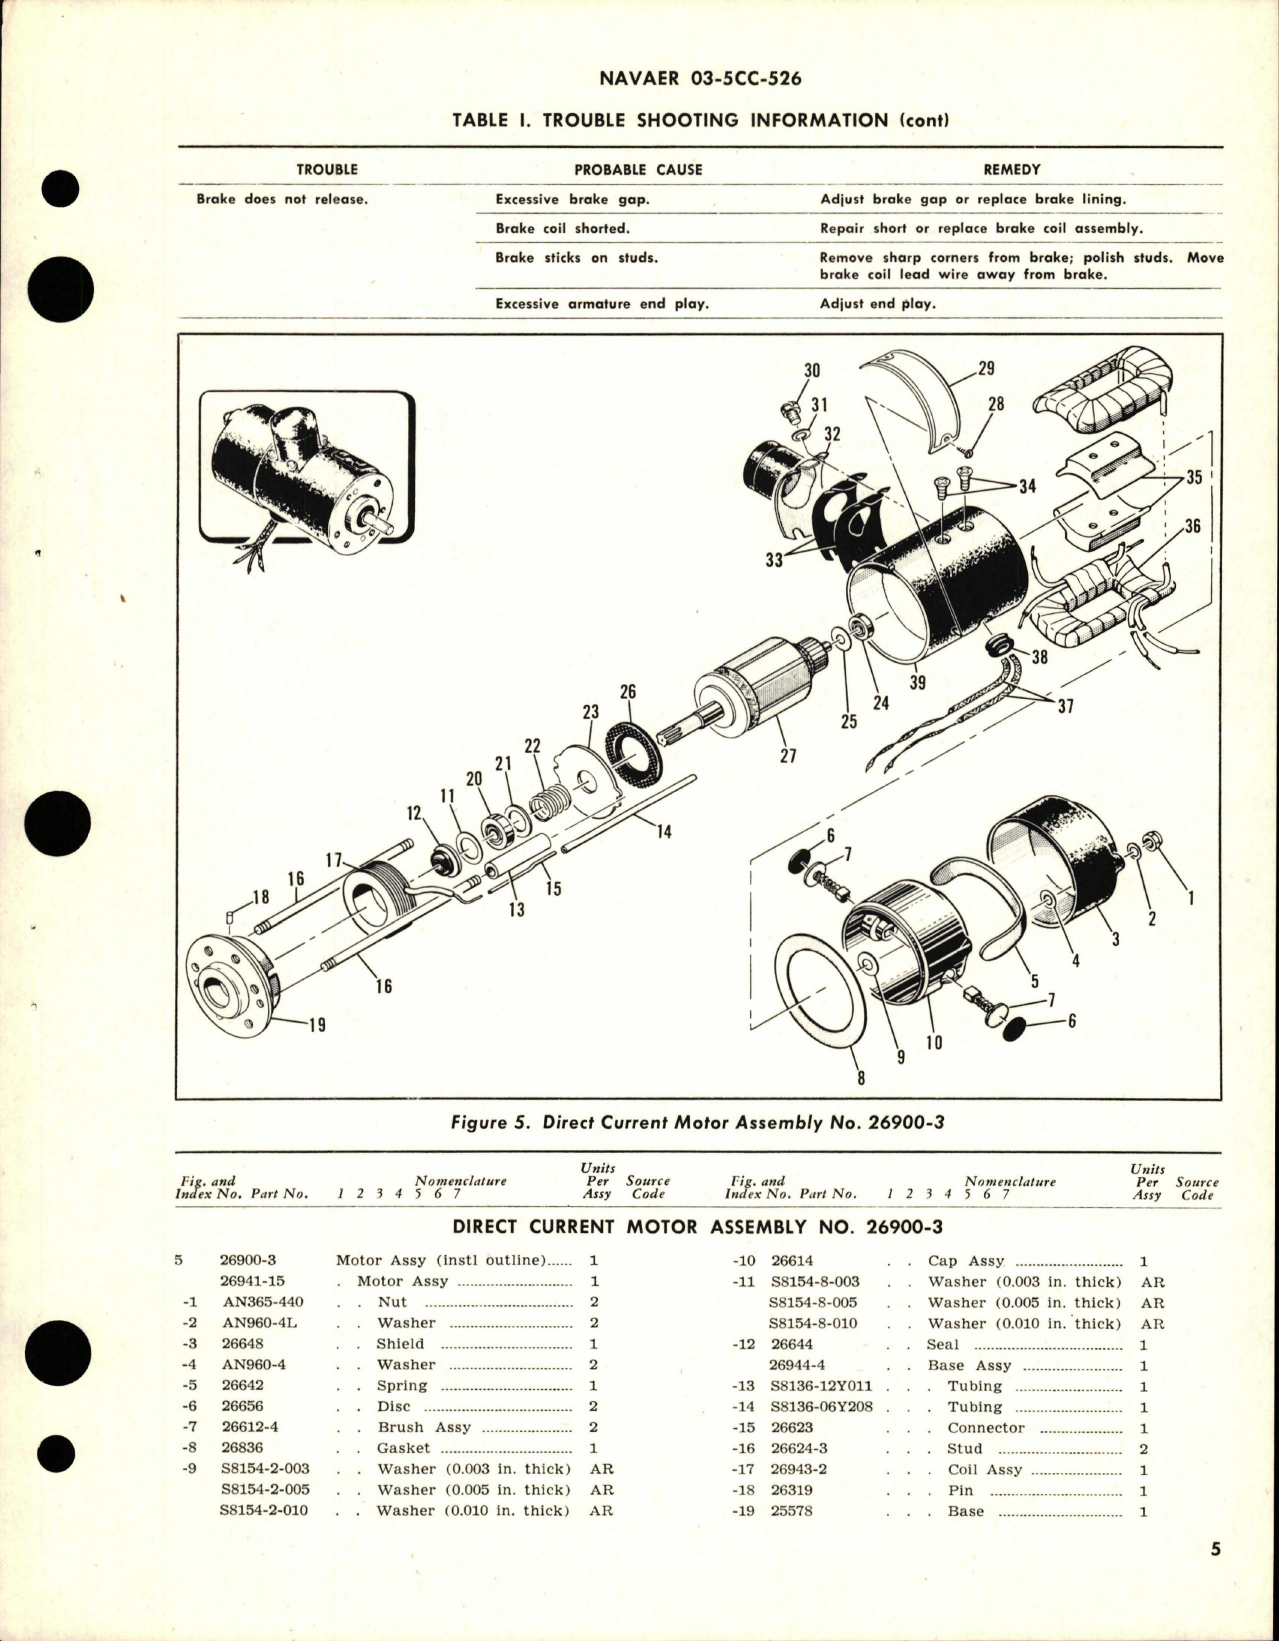 Sample page 5 from AirCorps Library document: Overhaul Instructions with Parts Breakdown for Direct Current Motor Assembly - 26900-3